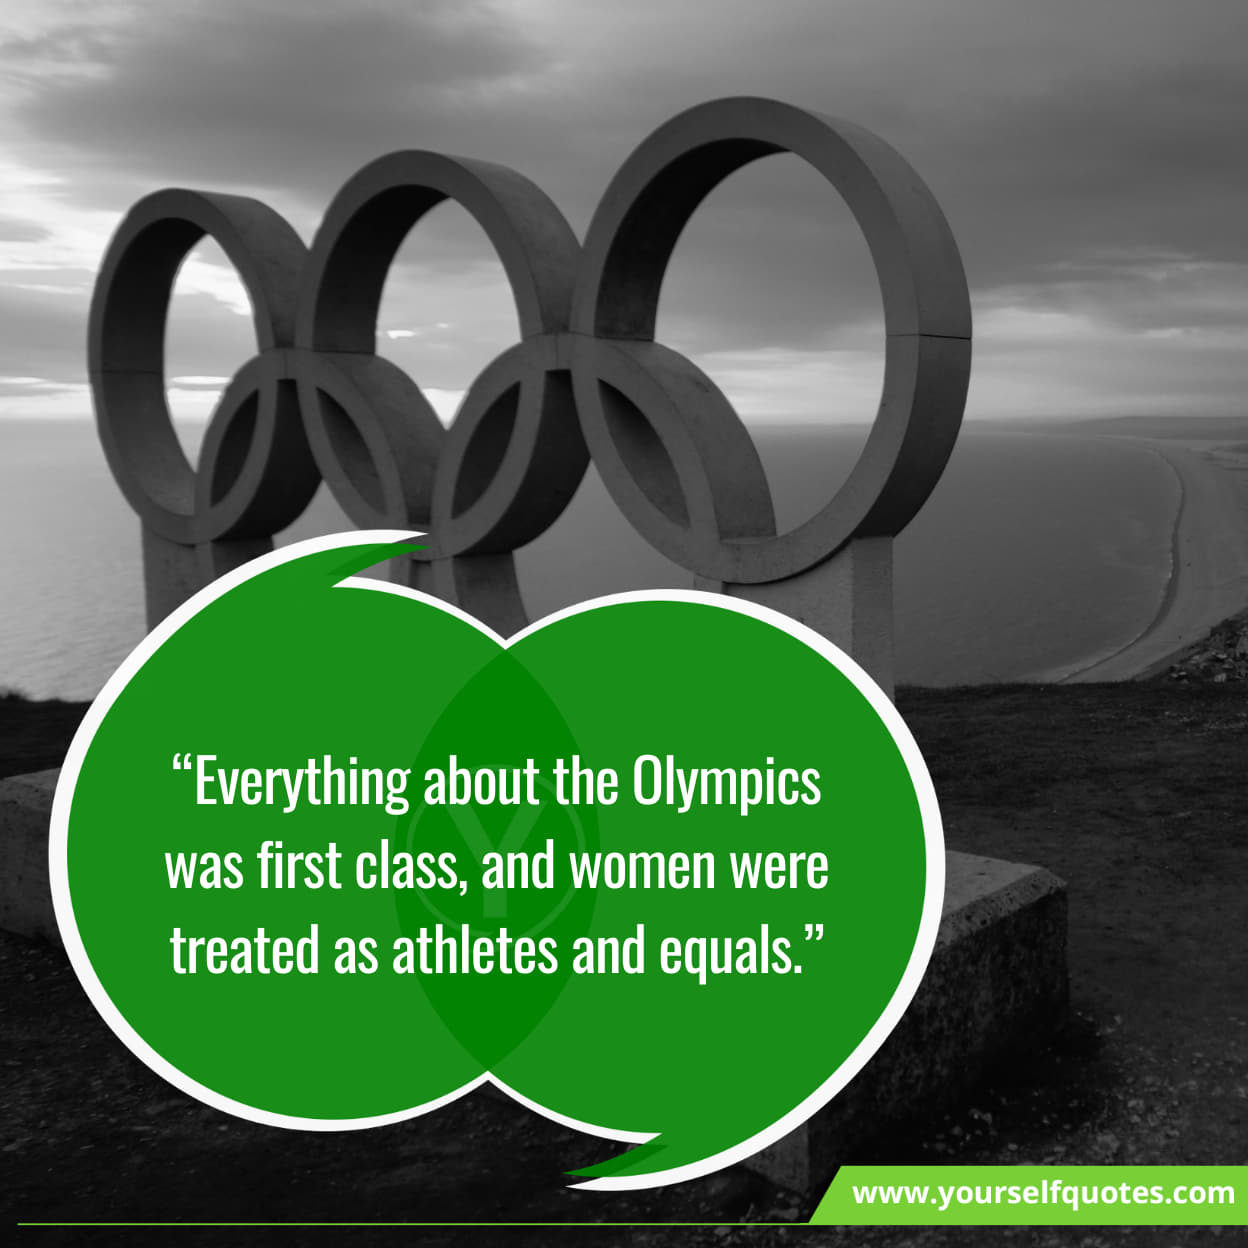 Quotes on the power of sports to inspire and transform lives